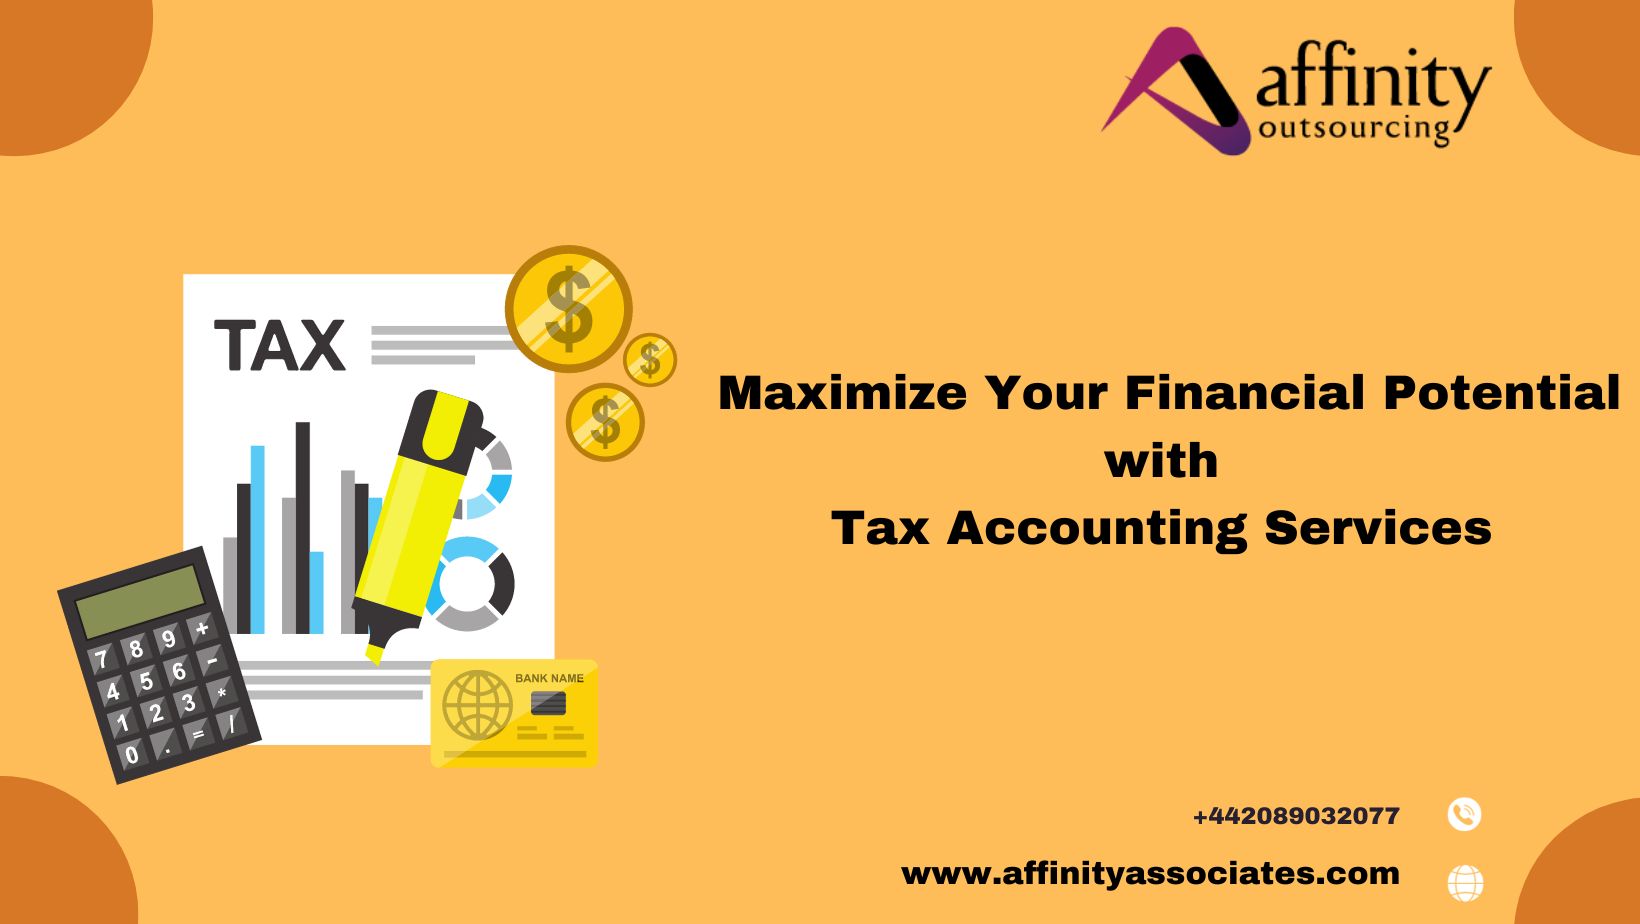 Maximize Your Financial Potential with Tax Accounting Services